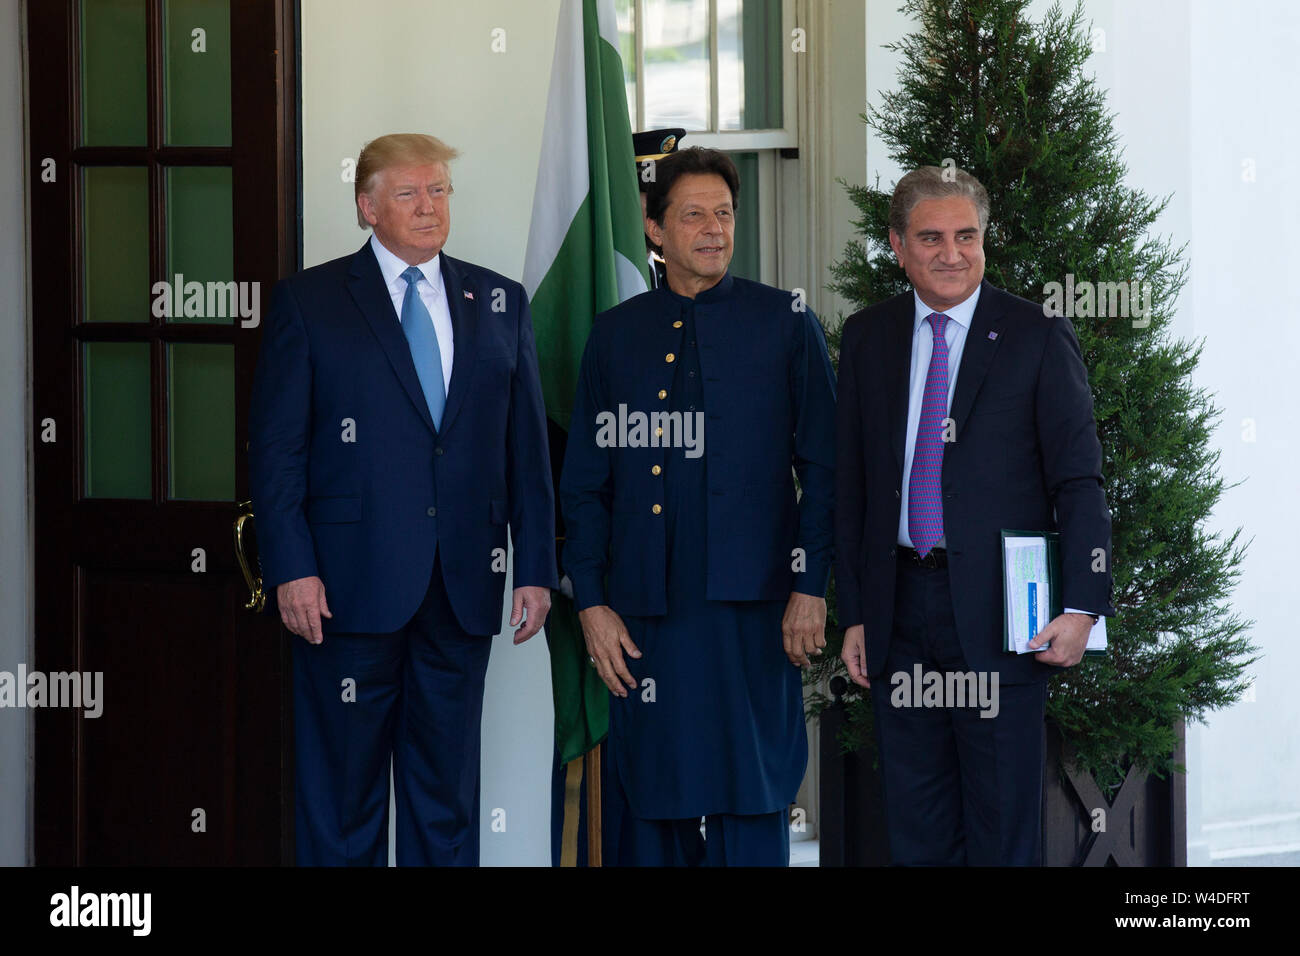 United States President Donald J. Trump greets the Prime Minister of the Islamic Republic of Pakistan Imran Khan as he arrives to the White House in Washington, DC, U.S. on July 22, 2019. Credit: Stefani Reynolds/CNP /MediaPunch Stock Photo